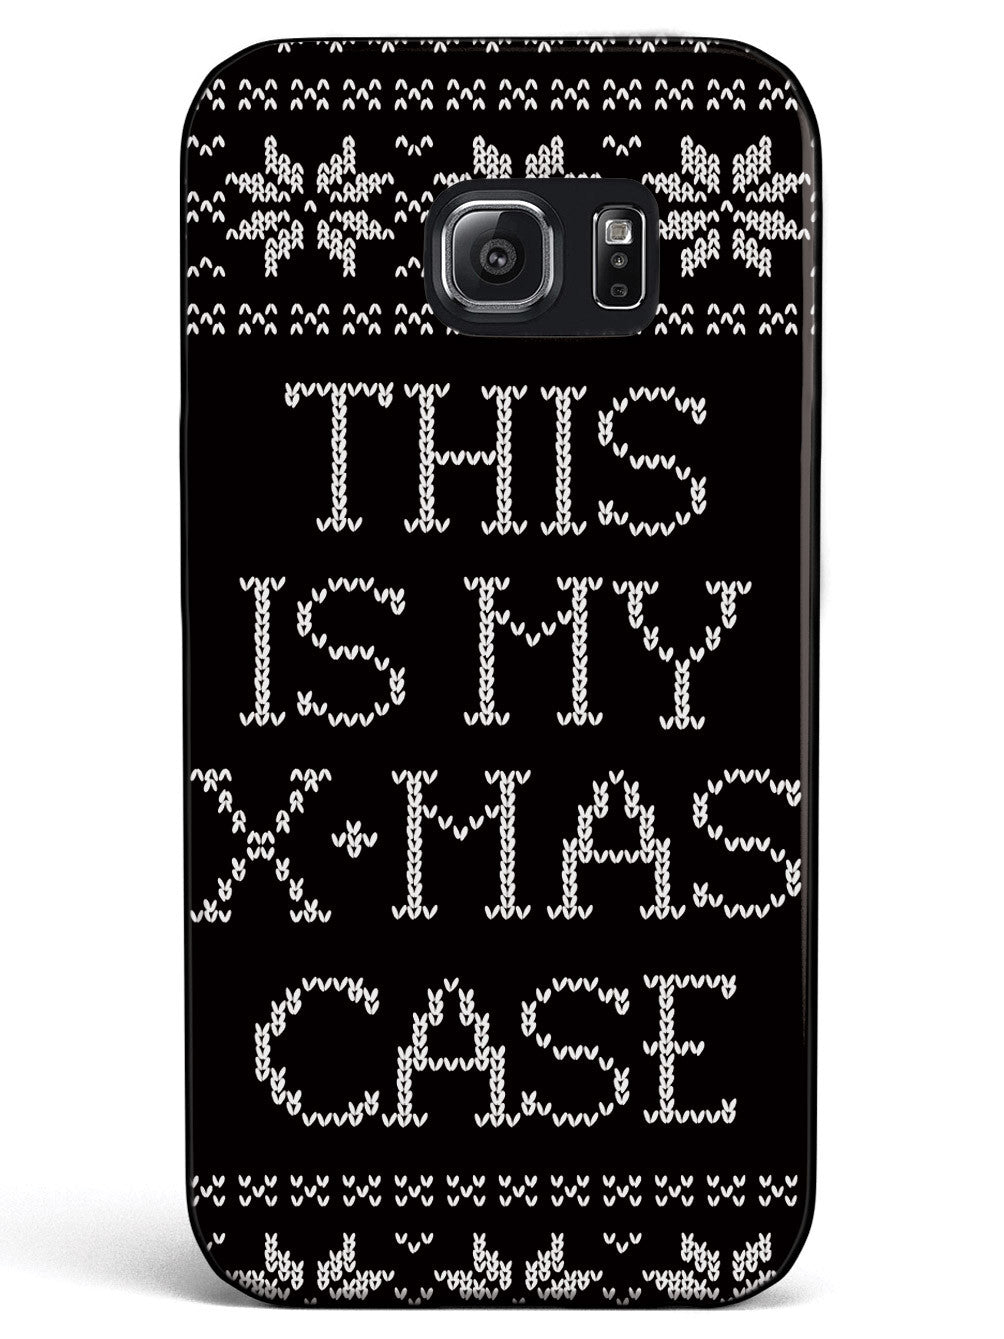 This is My X-Mas Case Sweater Style Case